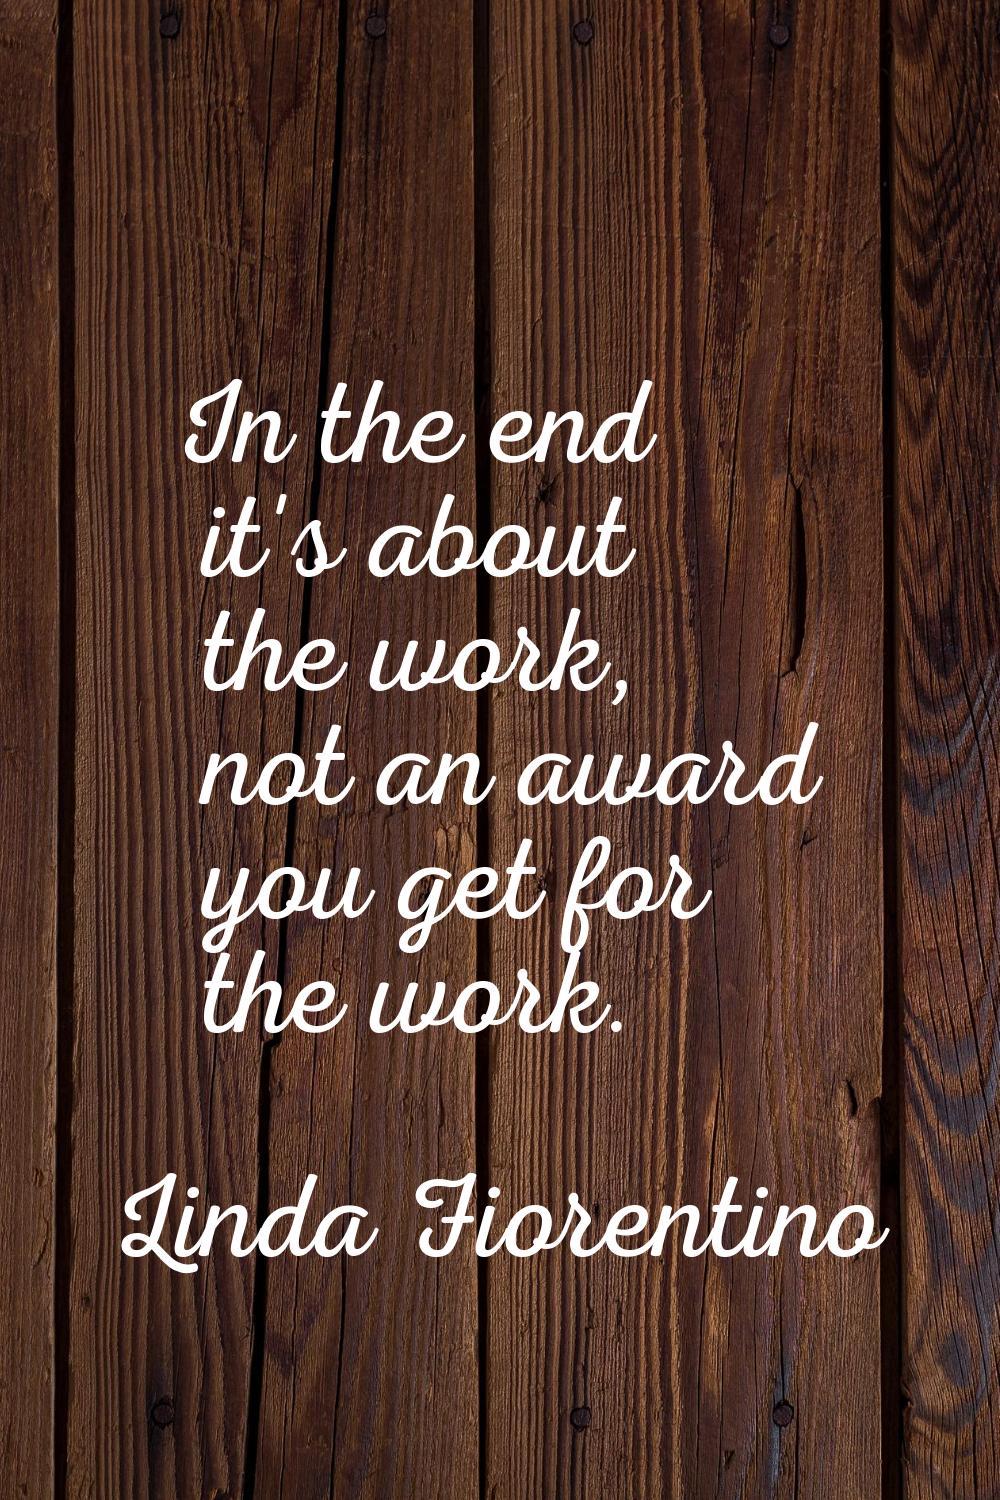 In the end it's about the work, not an award you get for the work.